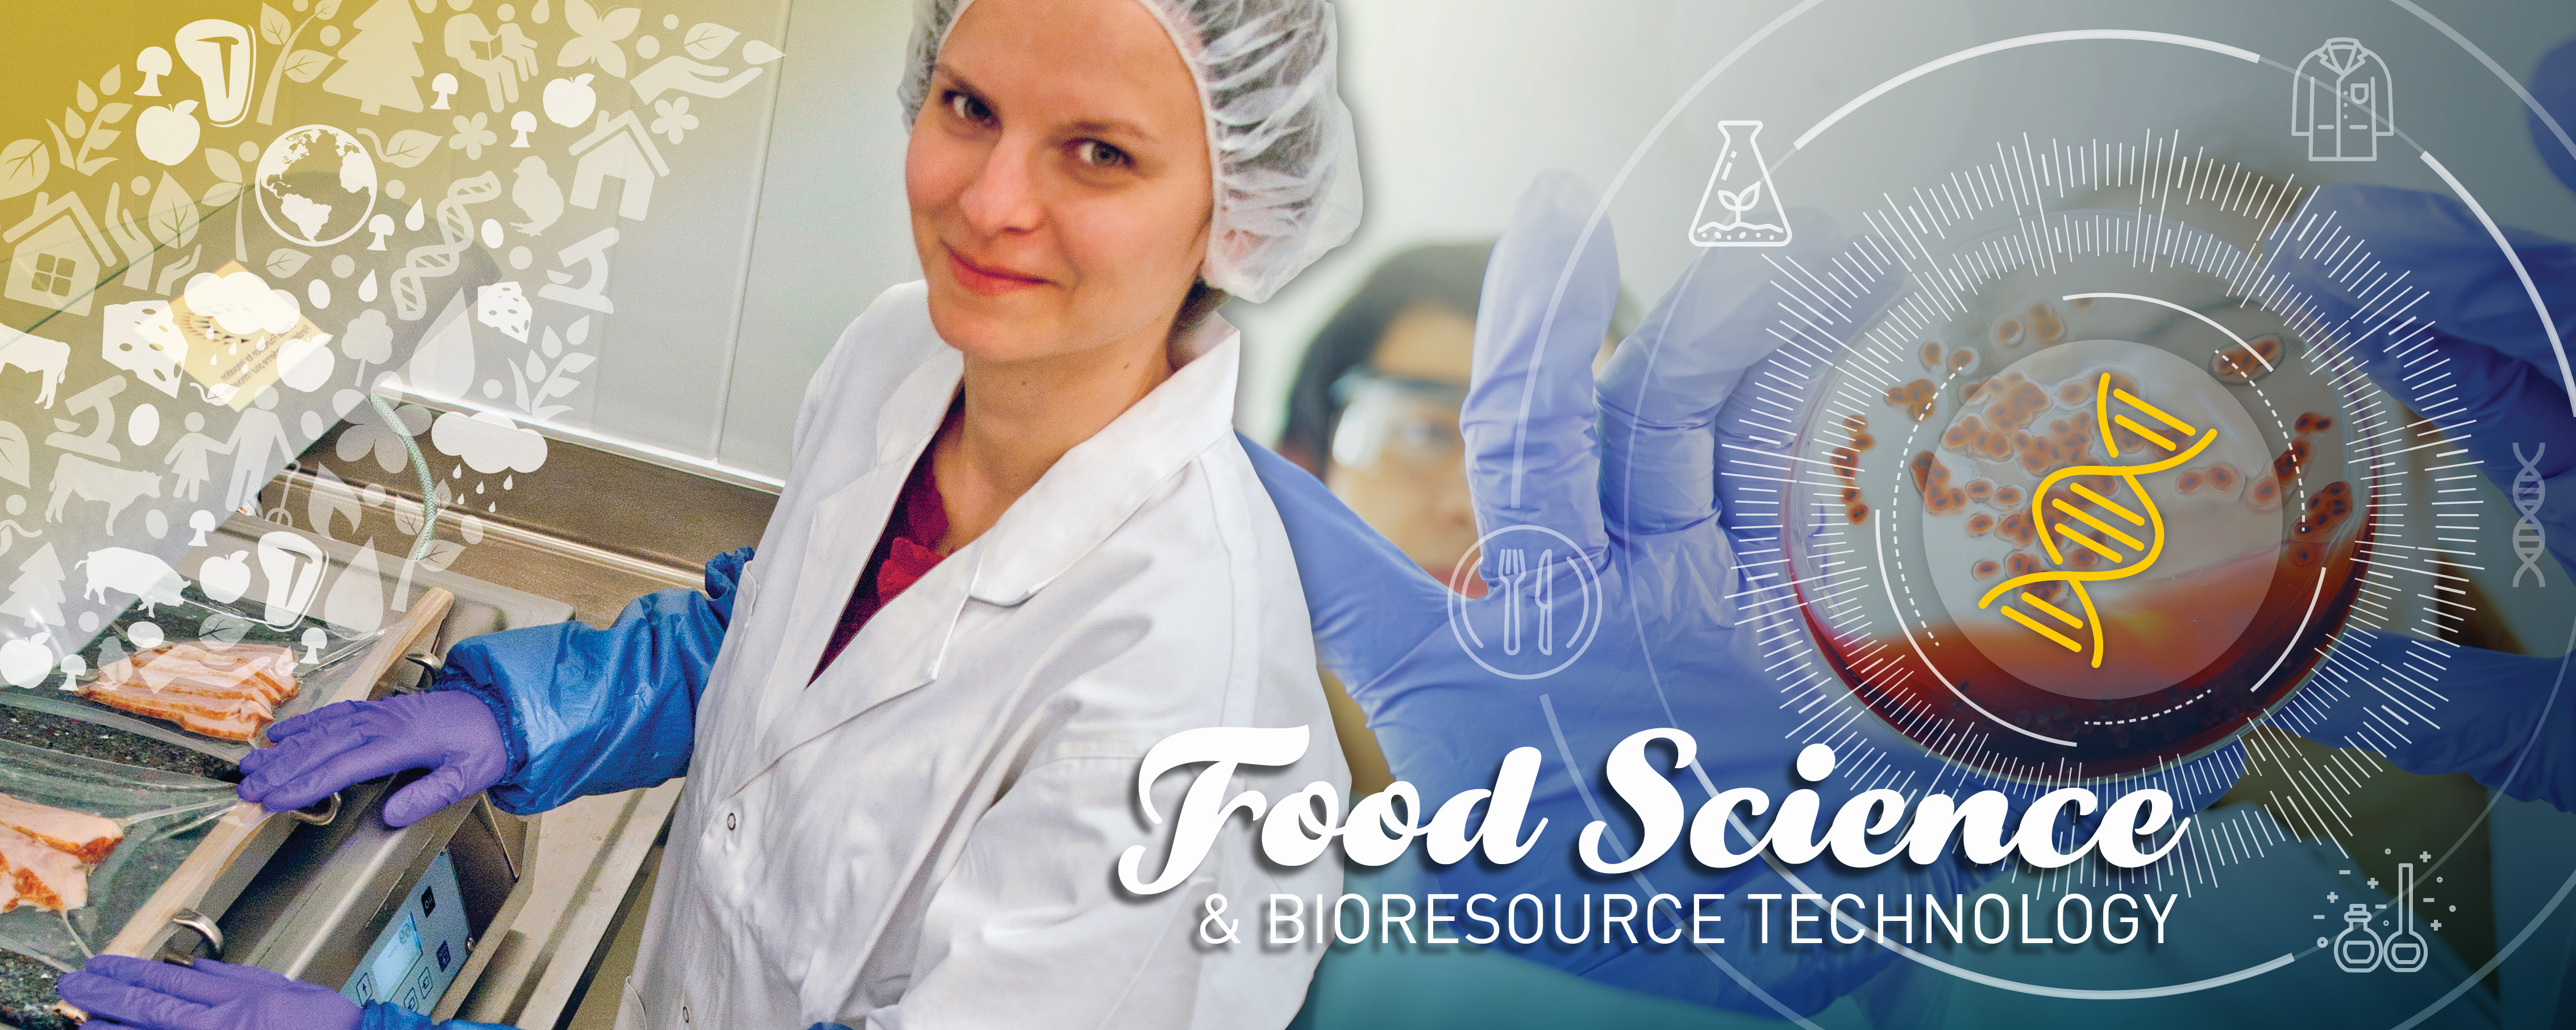 Food Science - Products